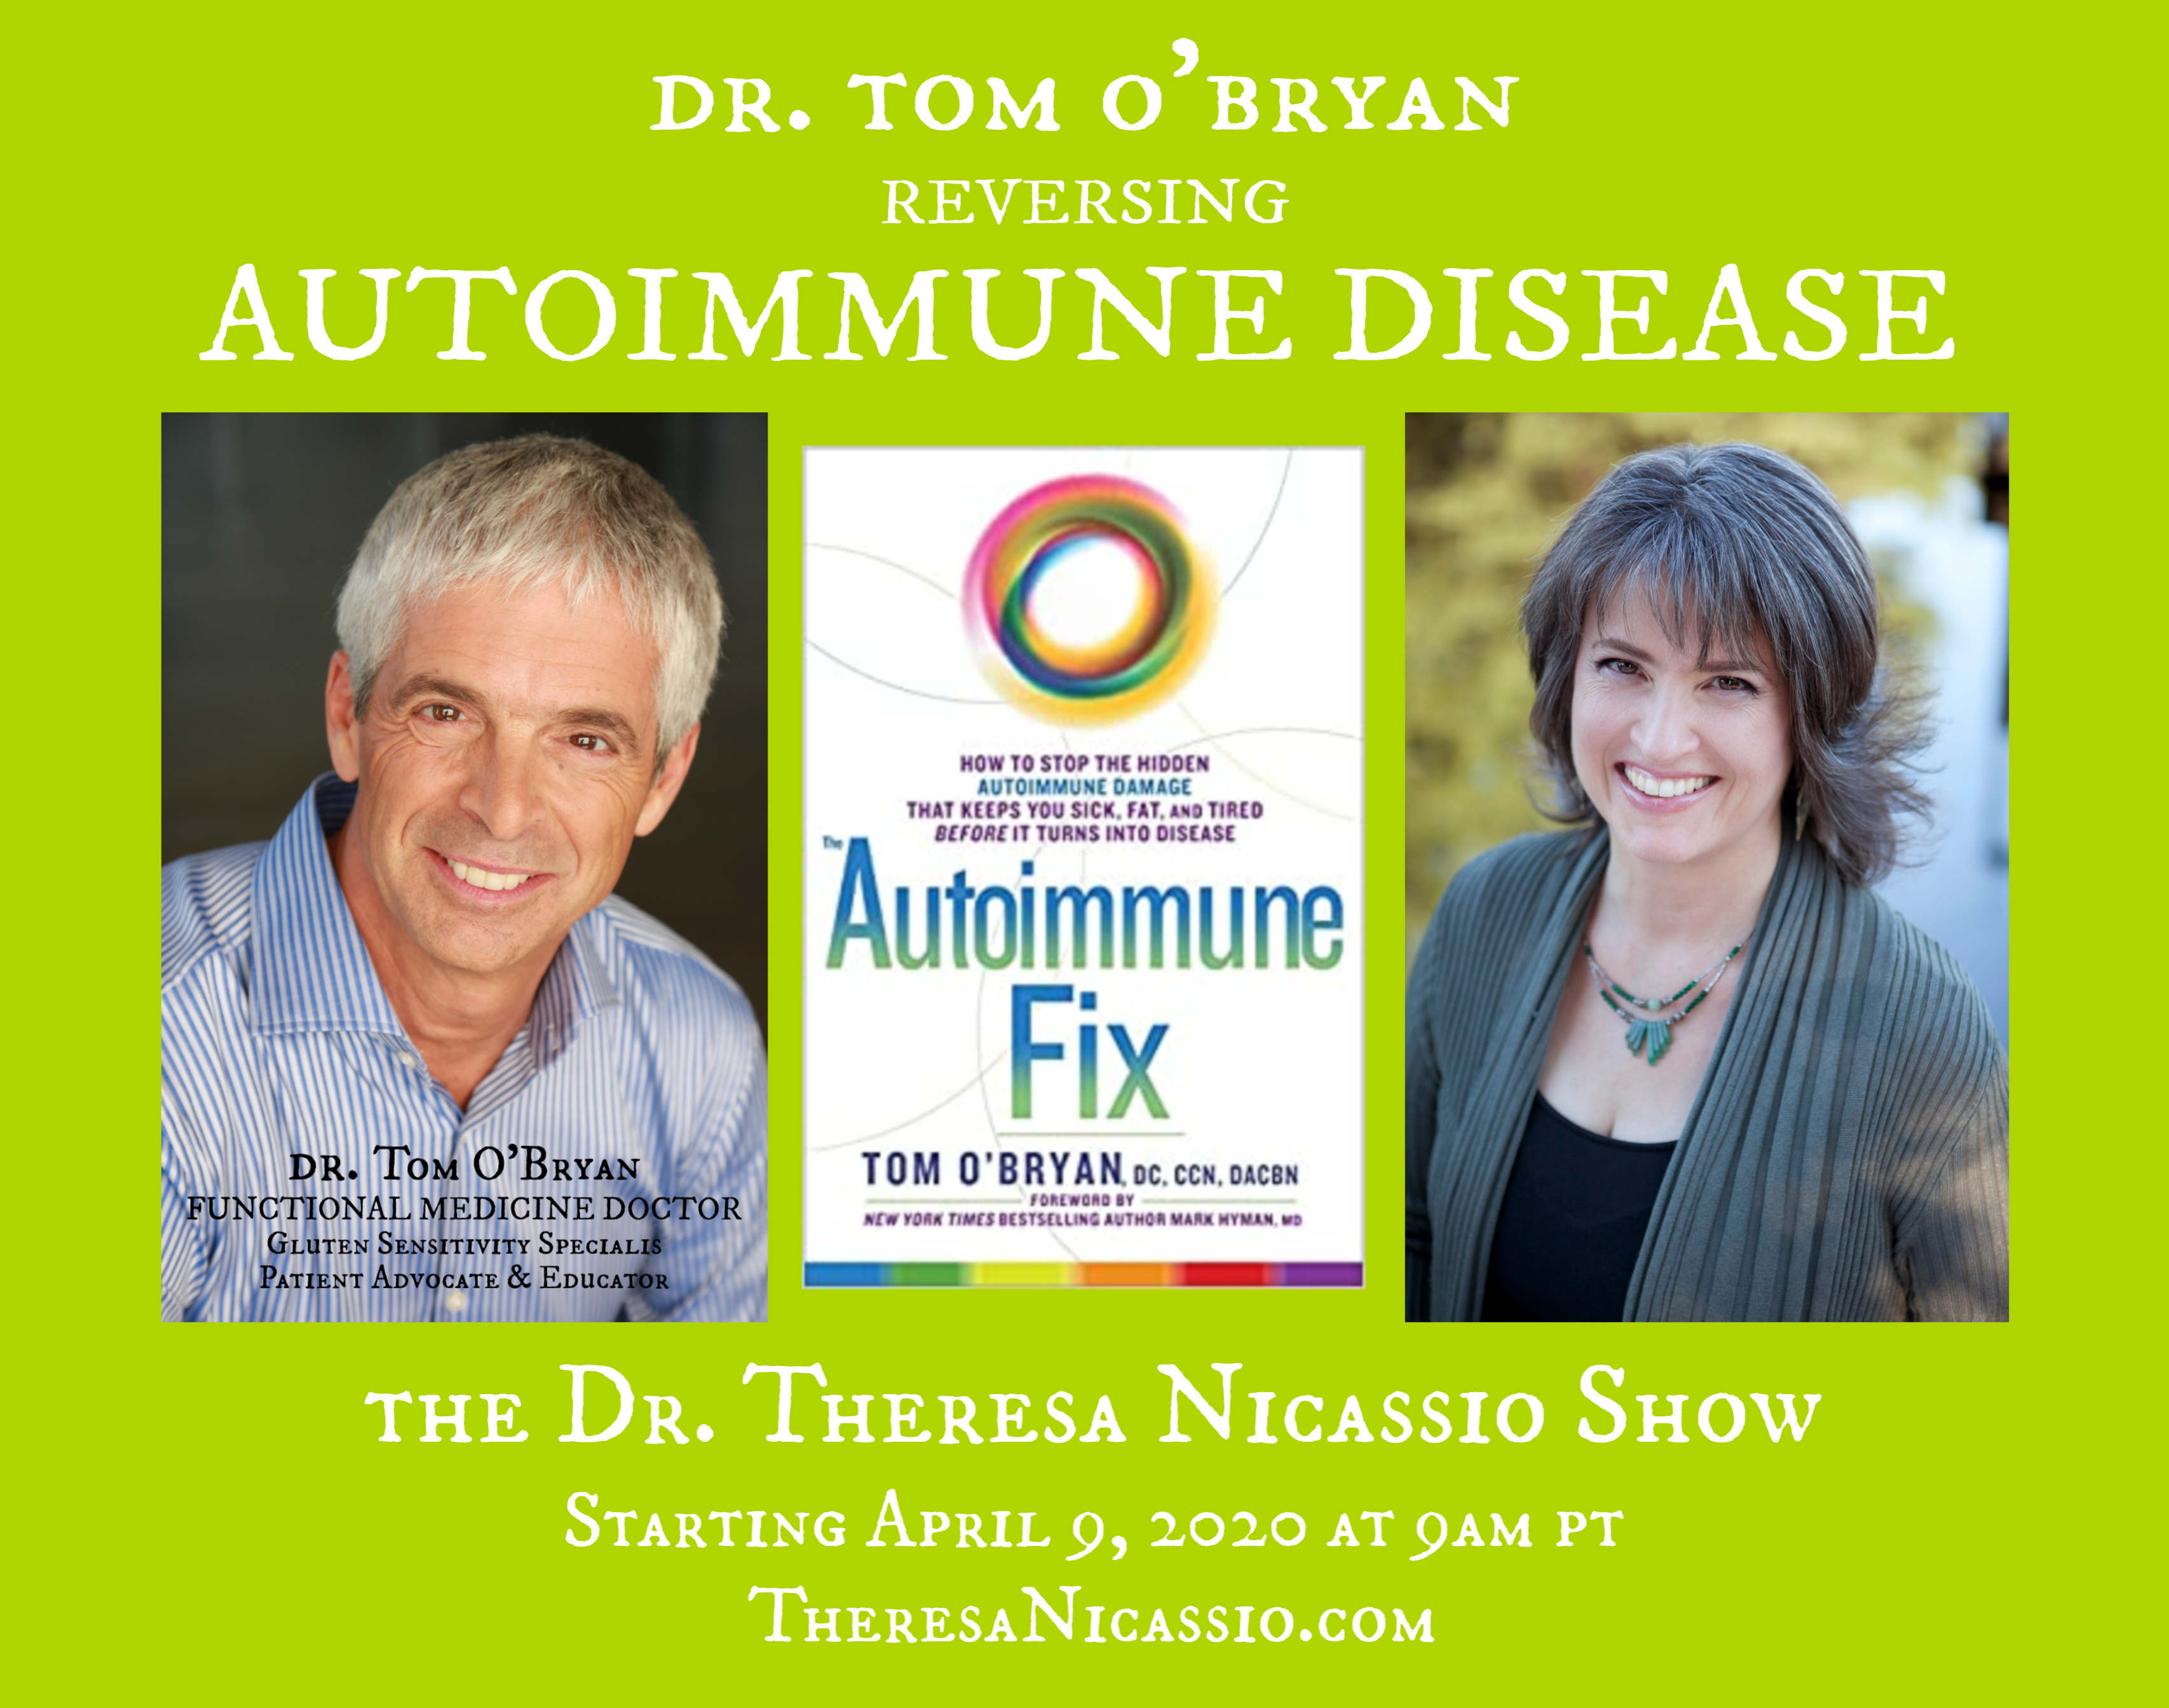 Hear Internationally recognized Functional Medicine leader & Gluten Sensitivity Expert Dr. Tom O’Bryan talk about AUTOIMMUNE DISEASE and how to reverse it on The Dr. Theresa Nicassio Show on HealthyLife.net - All Positive Talk Radio.